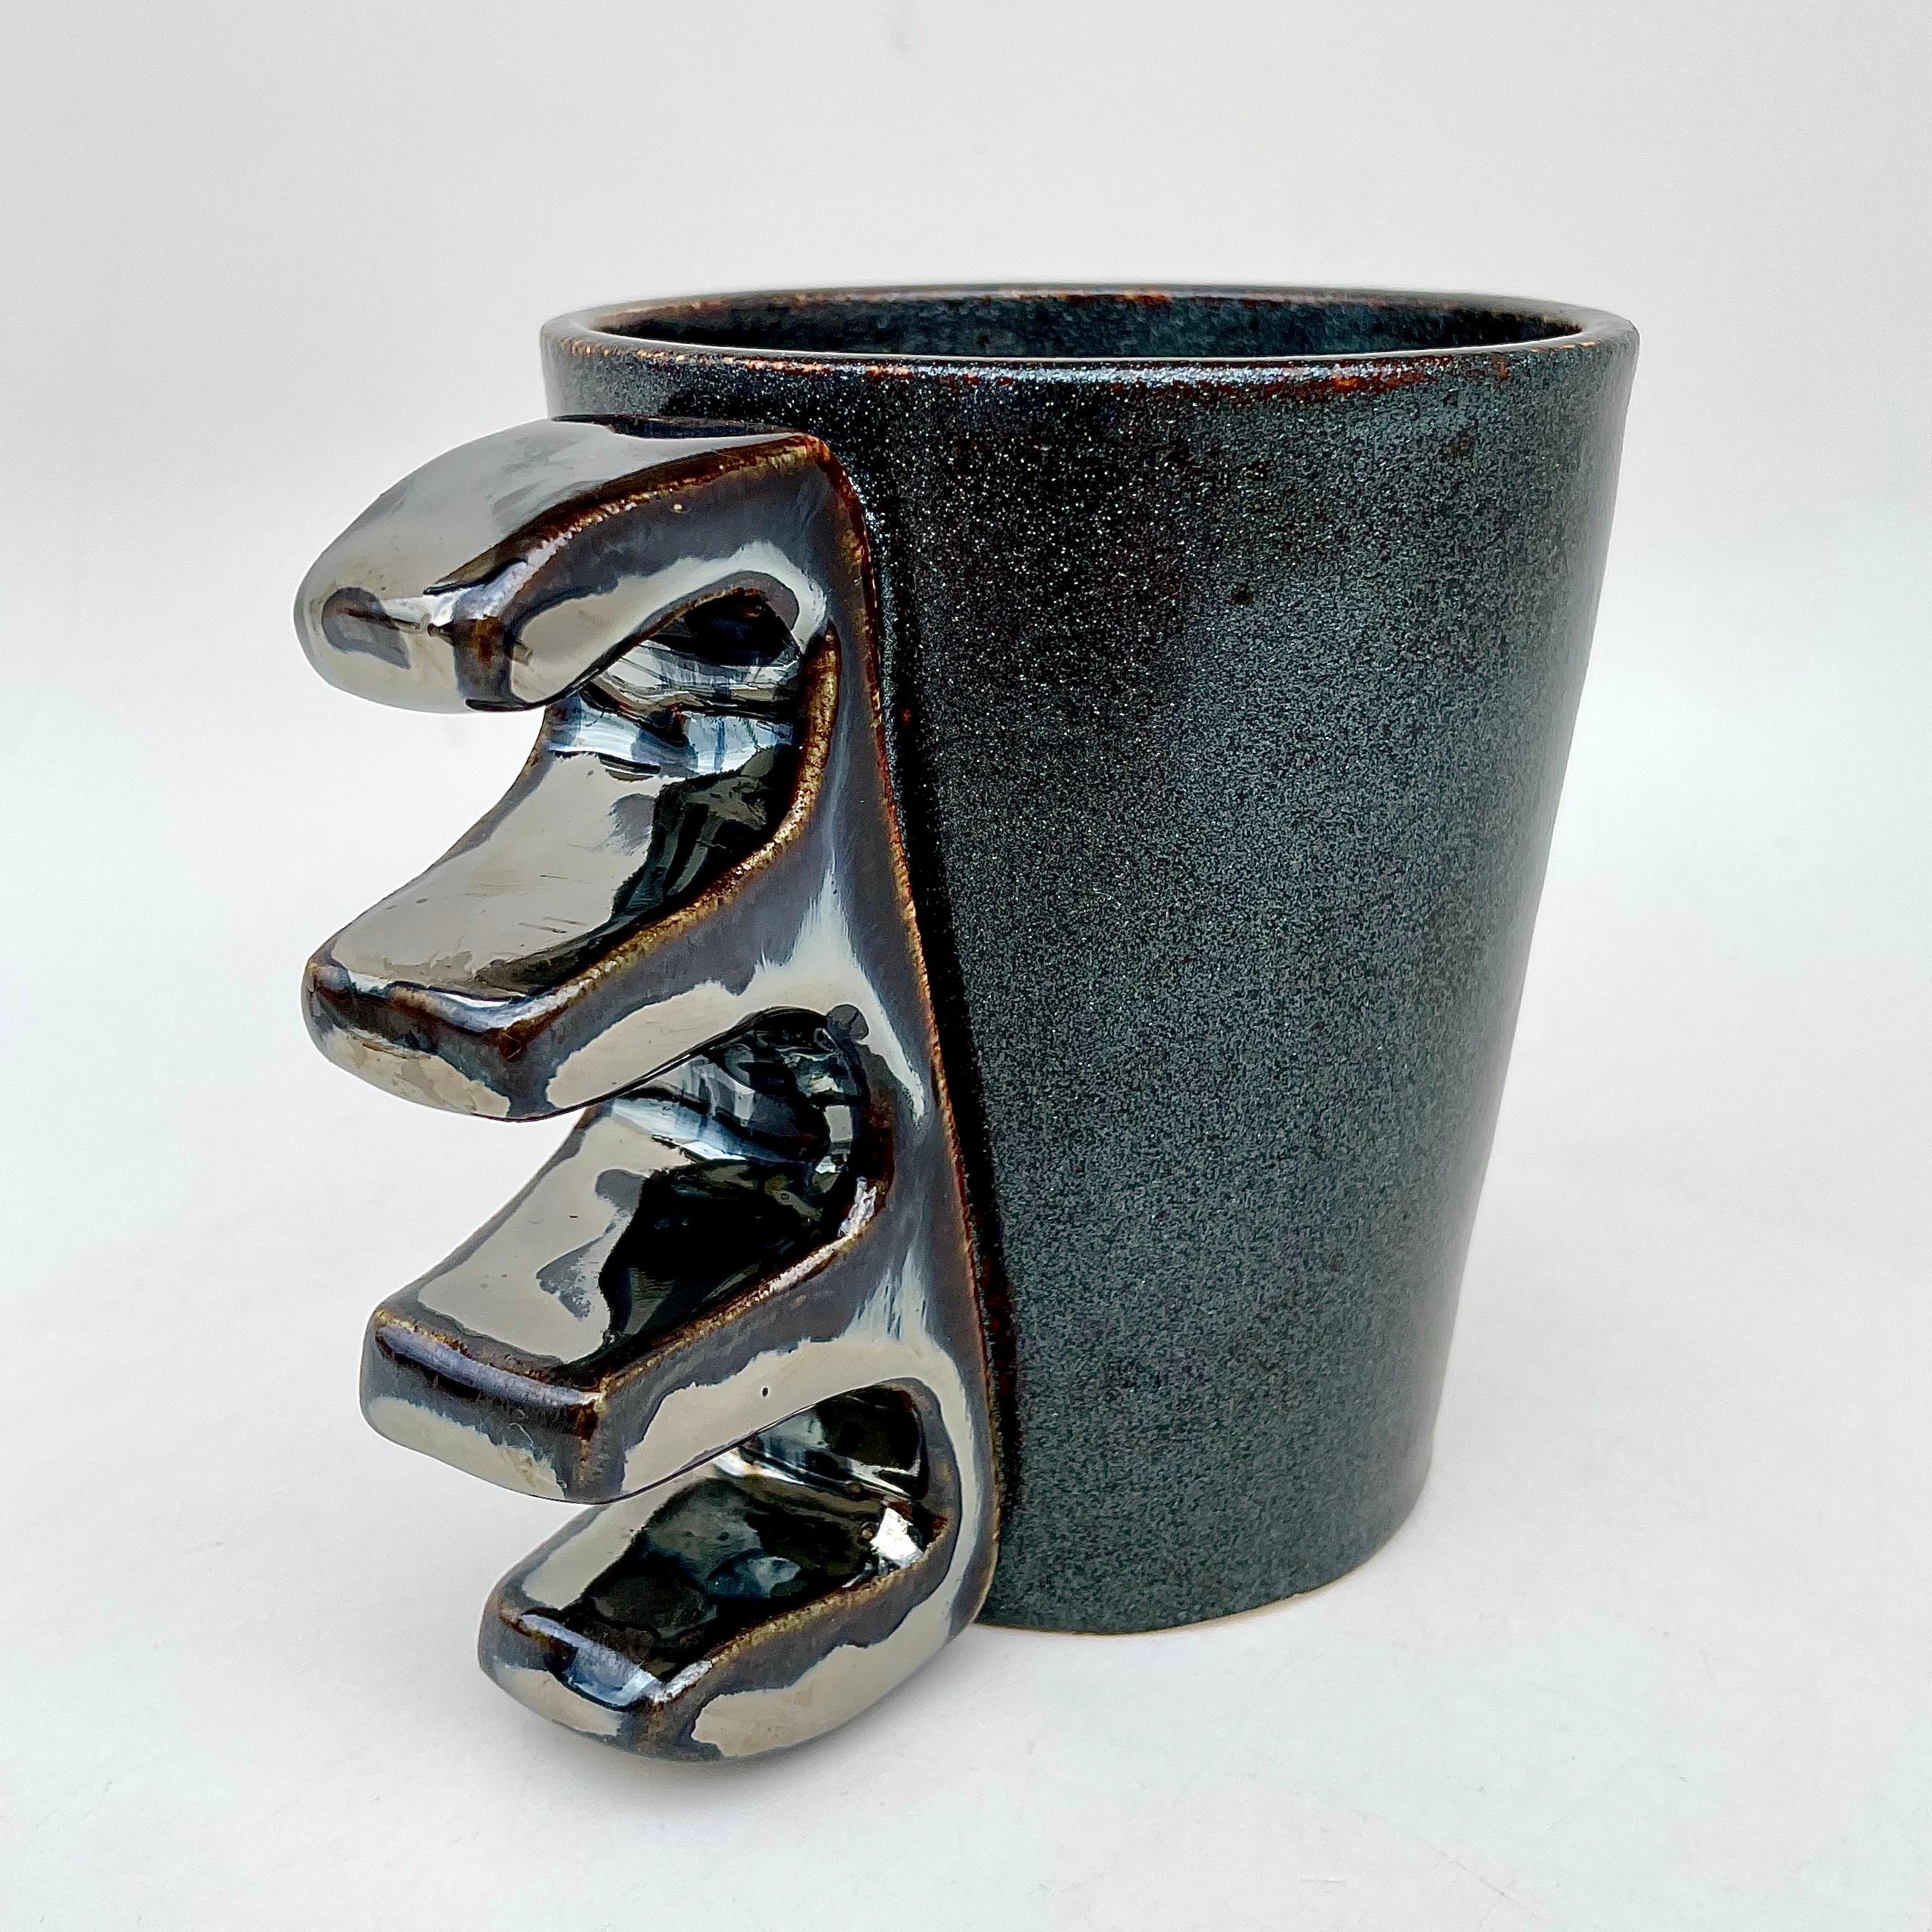 The Knuckler Four Finger V, shown here in moss and broken silver, the food safe vessel for your favorite beverage of choice, entertaining, or as a decorative object/object d'art. Versatile, sustainable and one of kind, made of recycled stoneware and